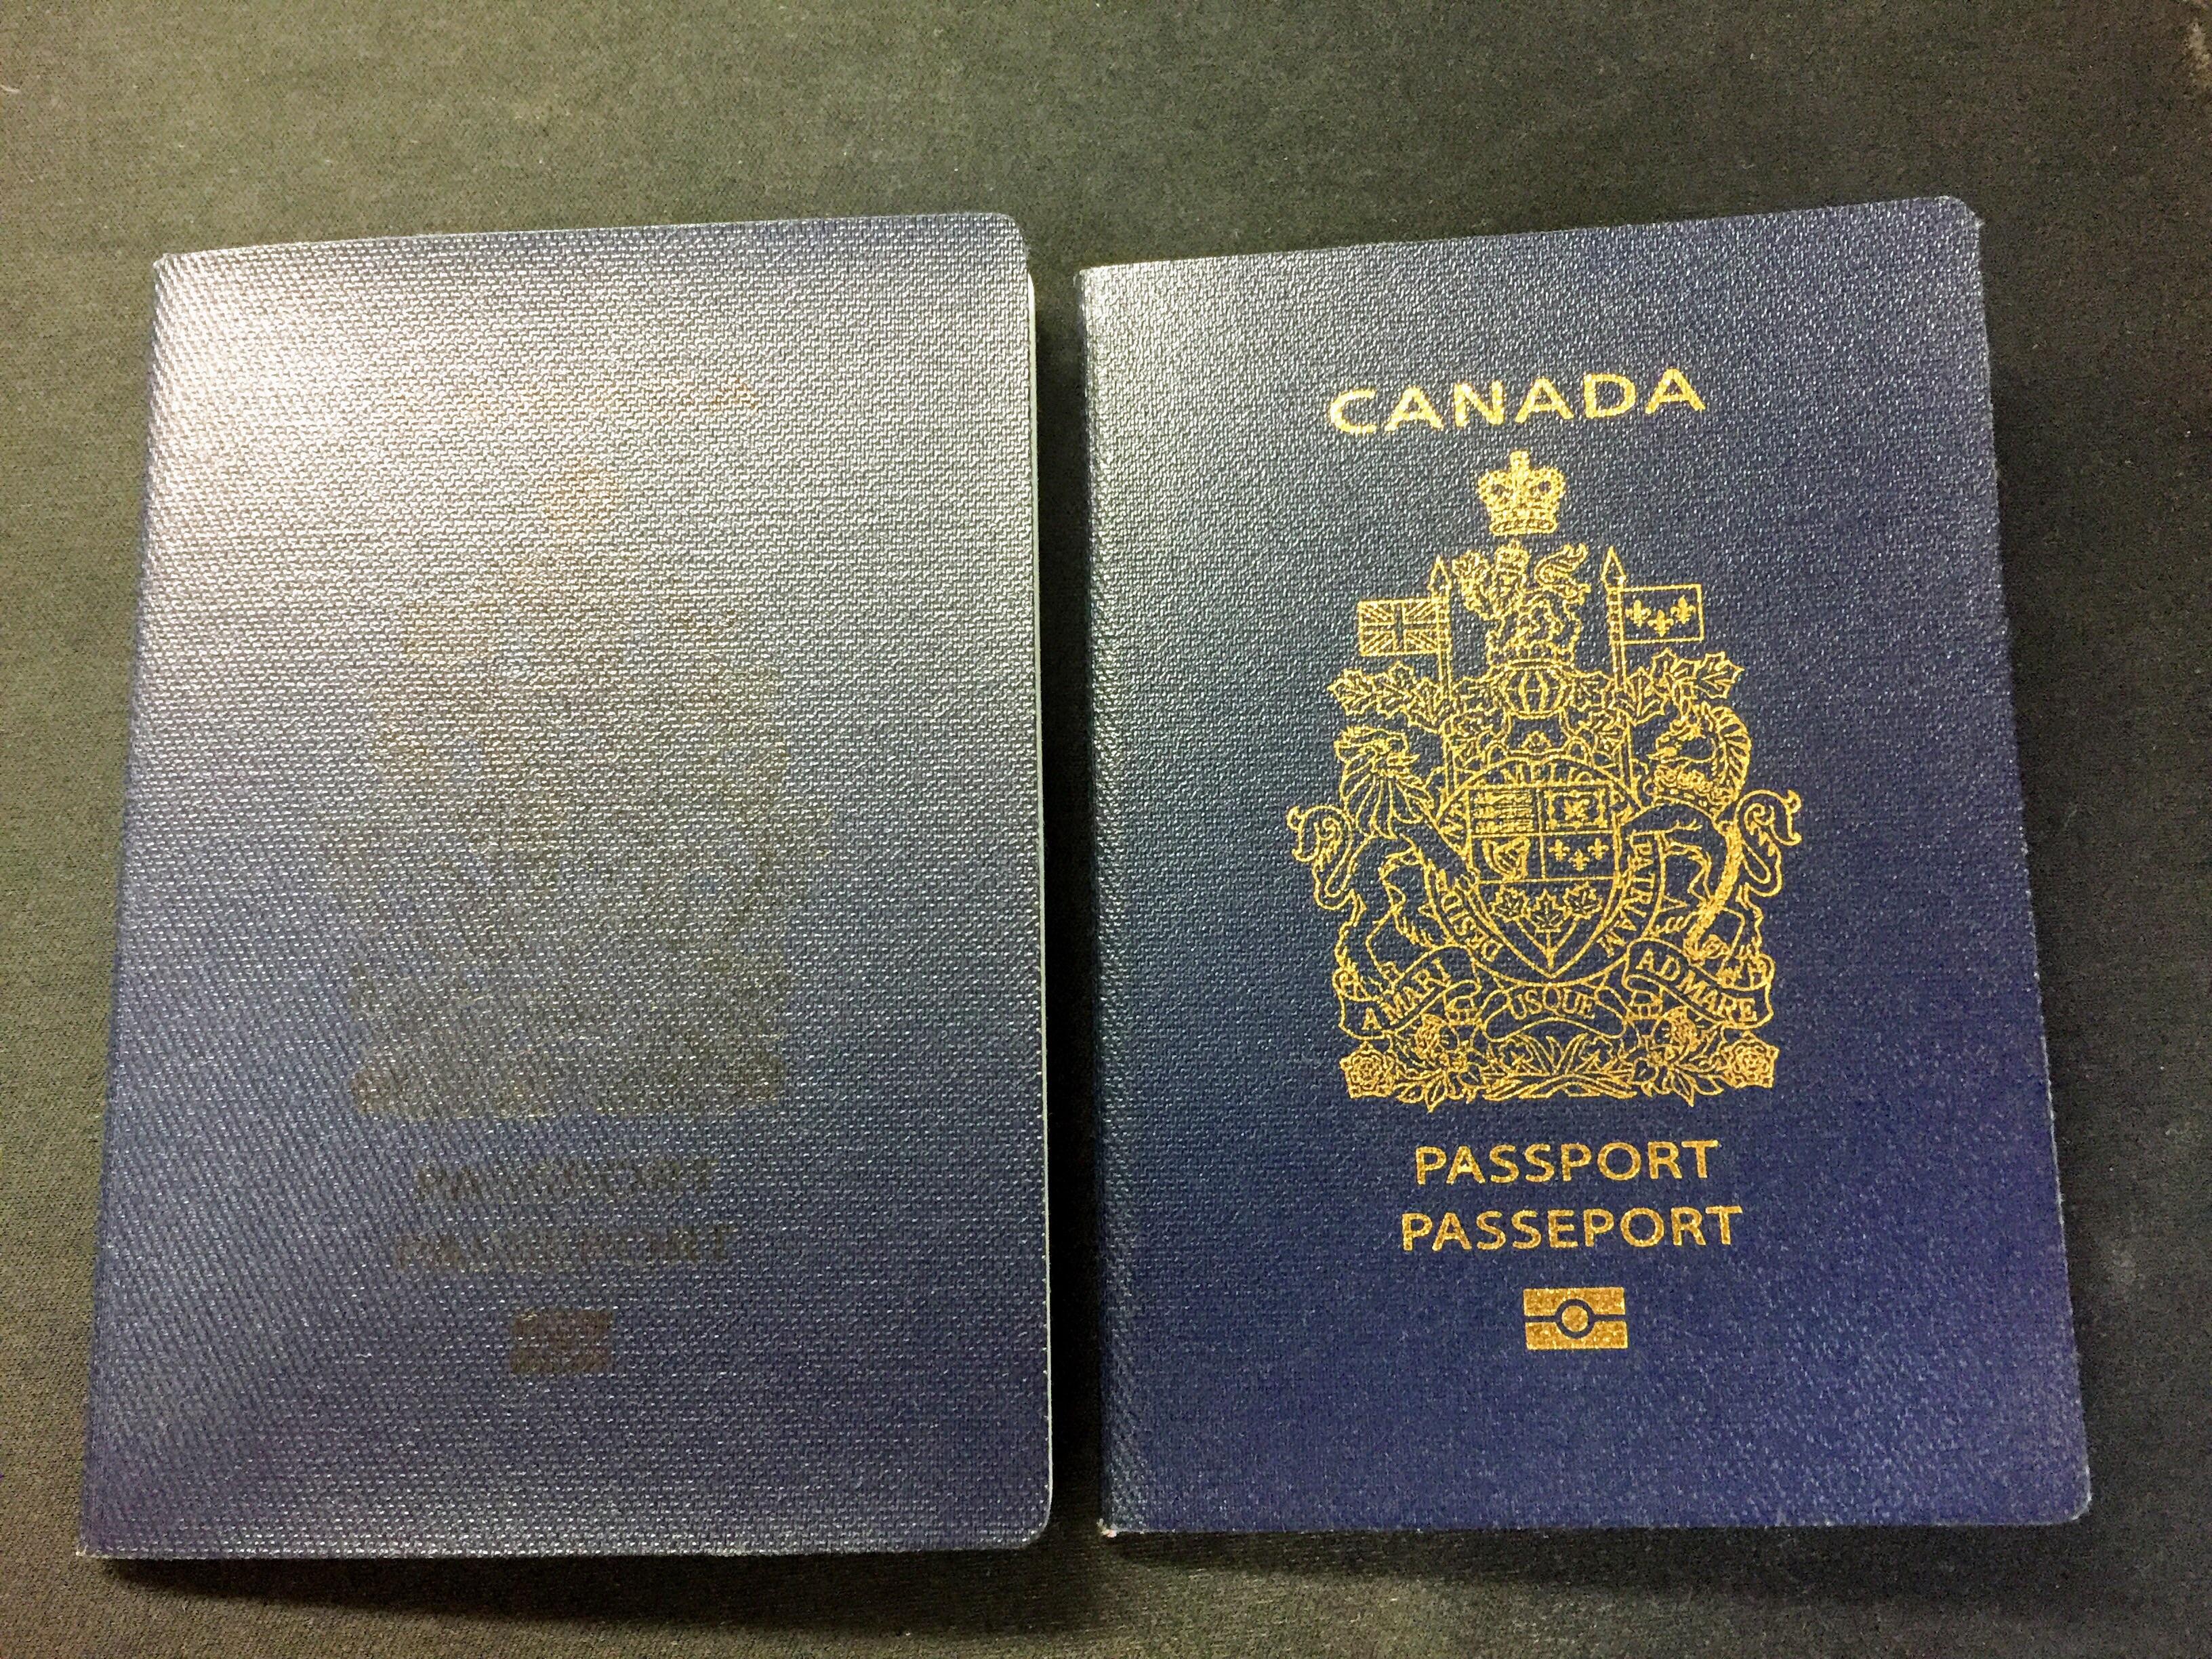 Canadian passport constantly in my pocket while traveling. : Wellworn